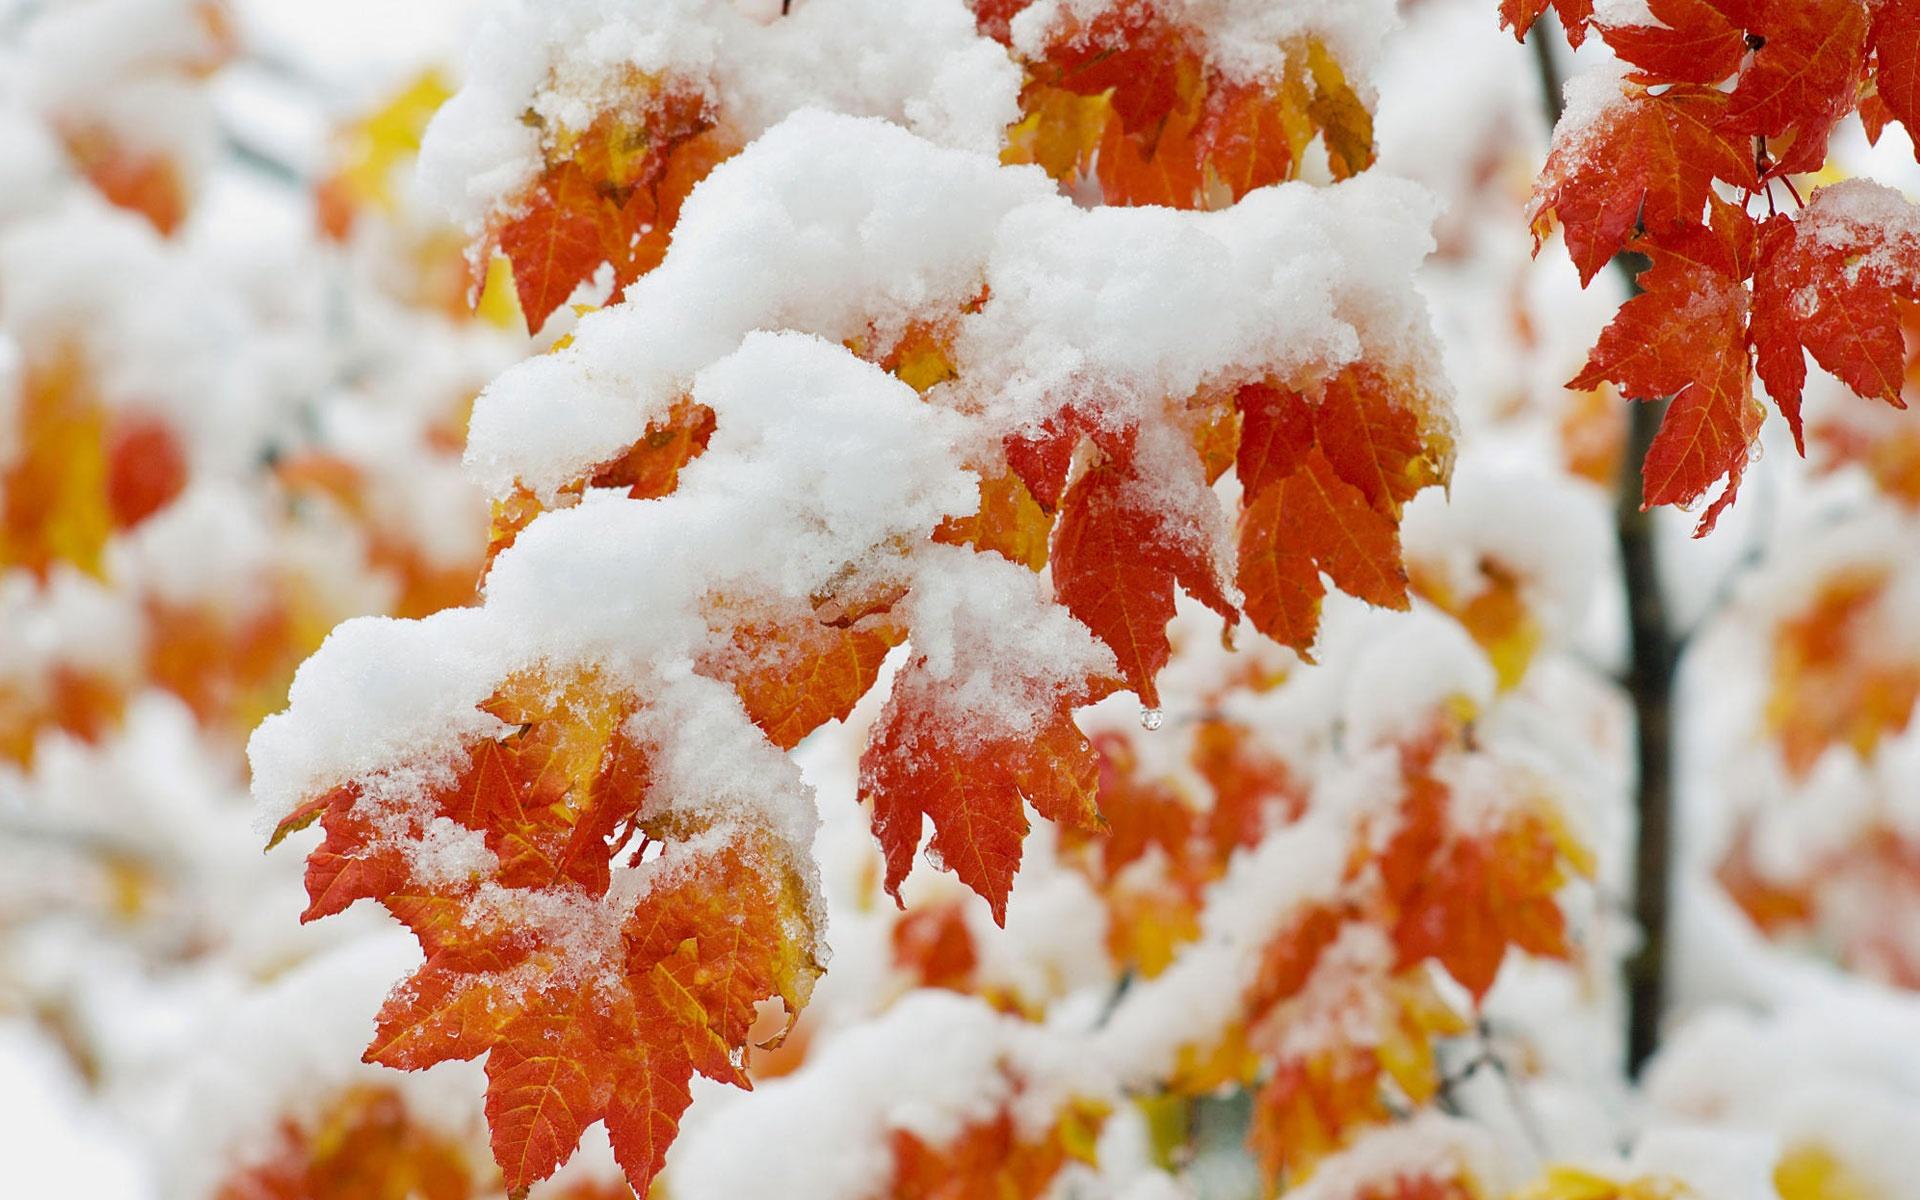 Early Snowfall Wallpaper in jpg format for free download